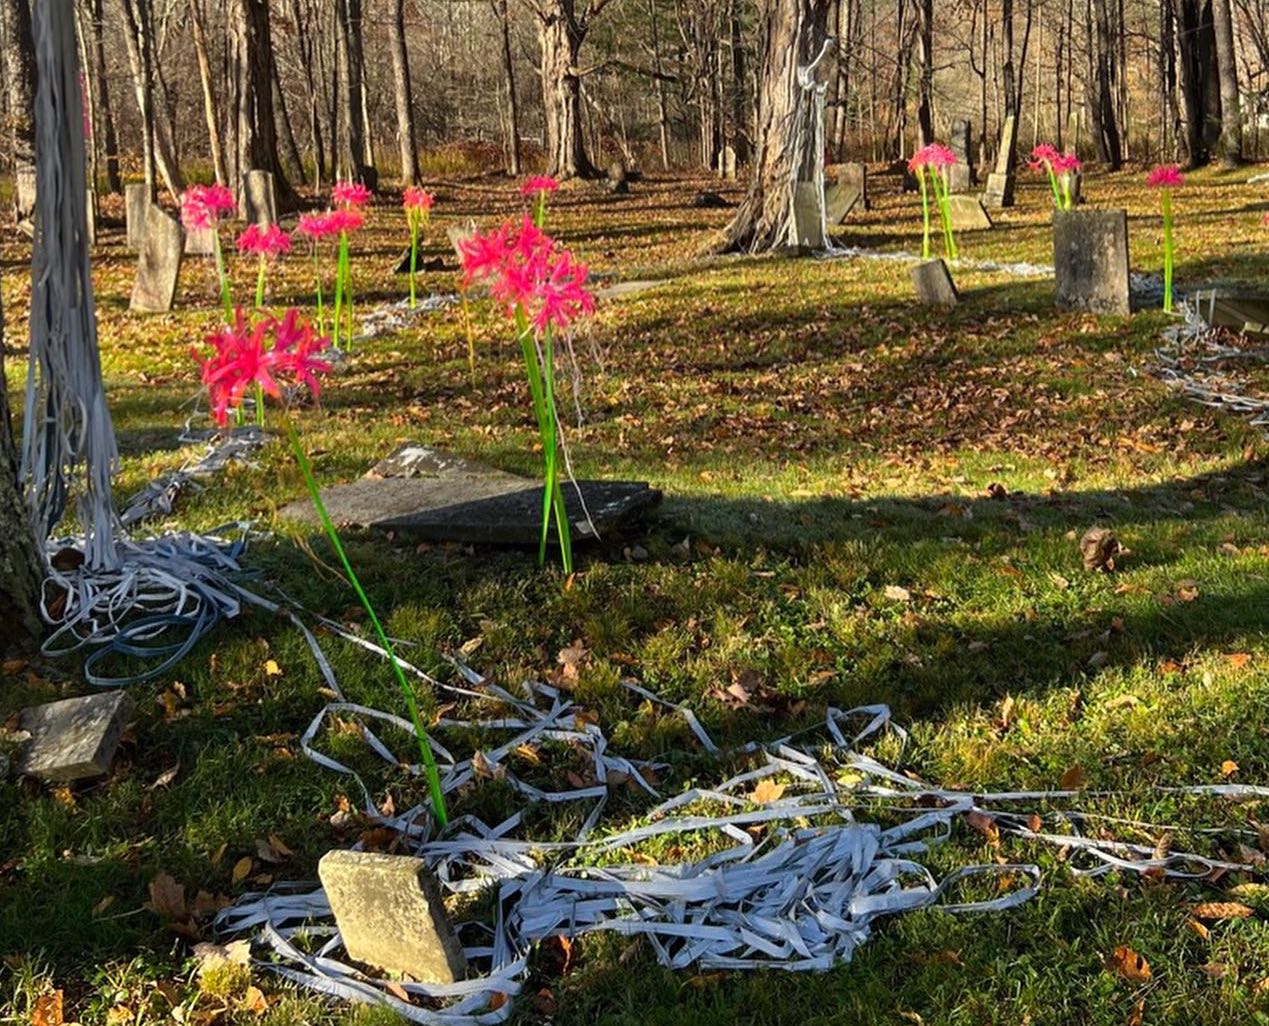 tall ghost lily sculptures are dispersed throughout a forest. The sculptures have tall green stems and hot pink flowers; there are white cords all over the ground